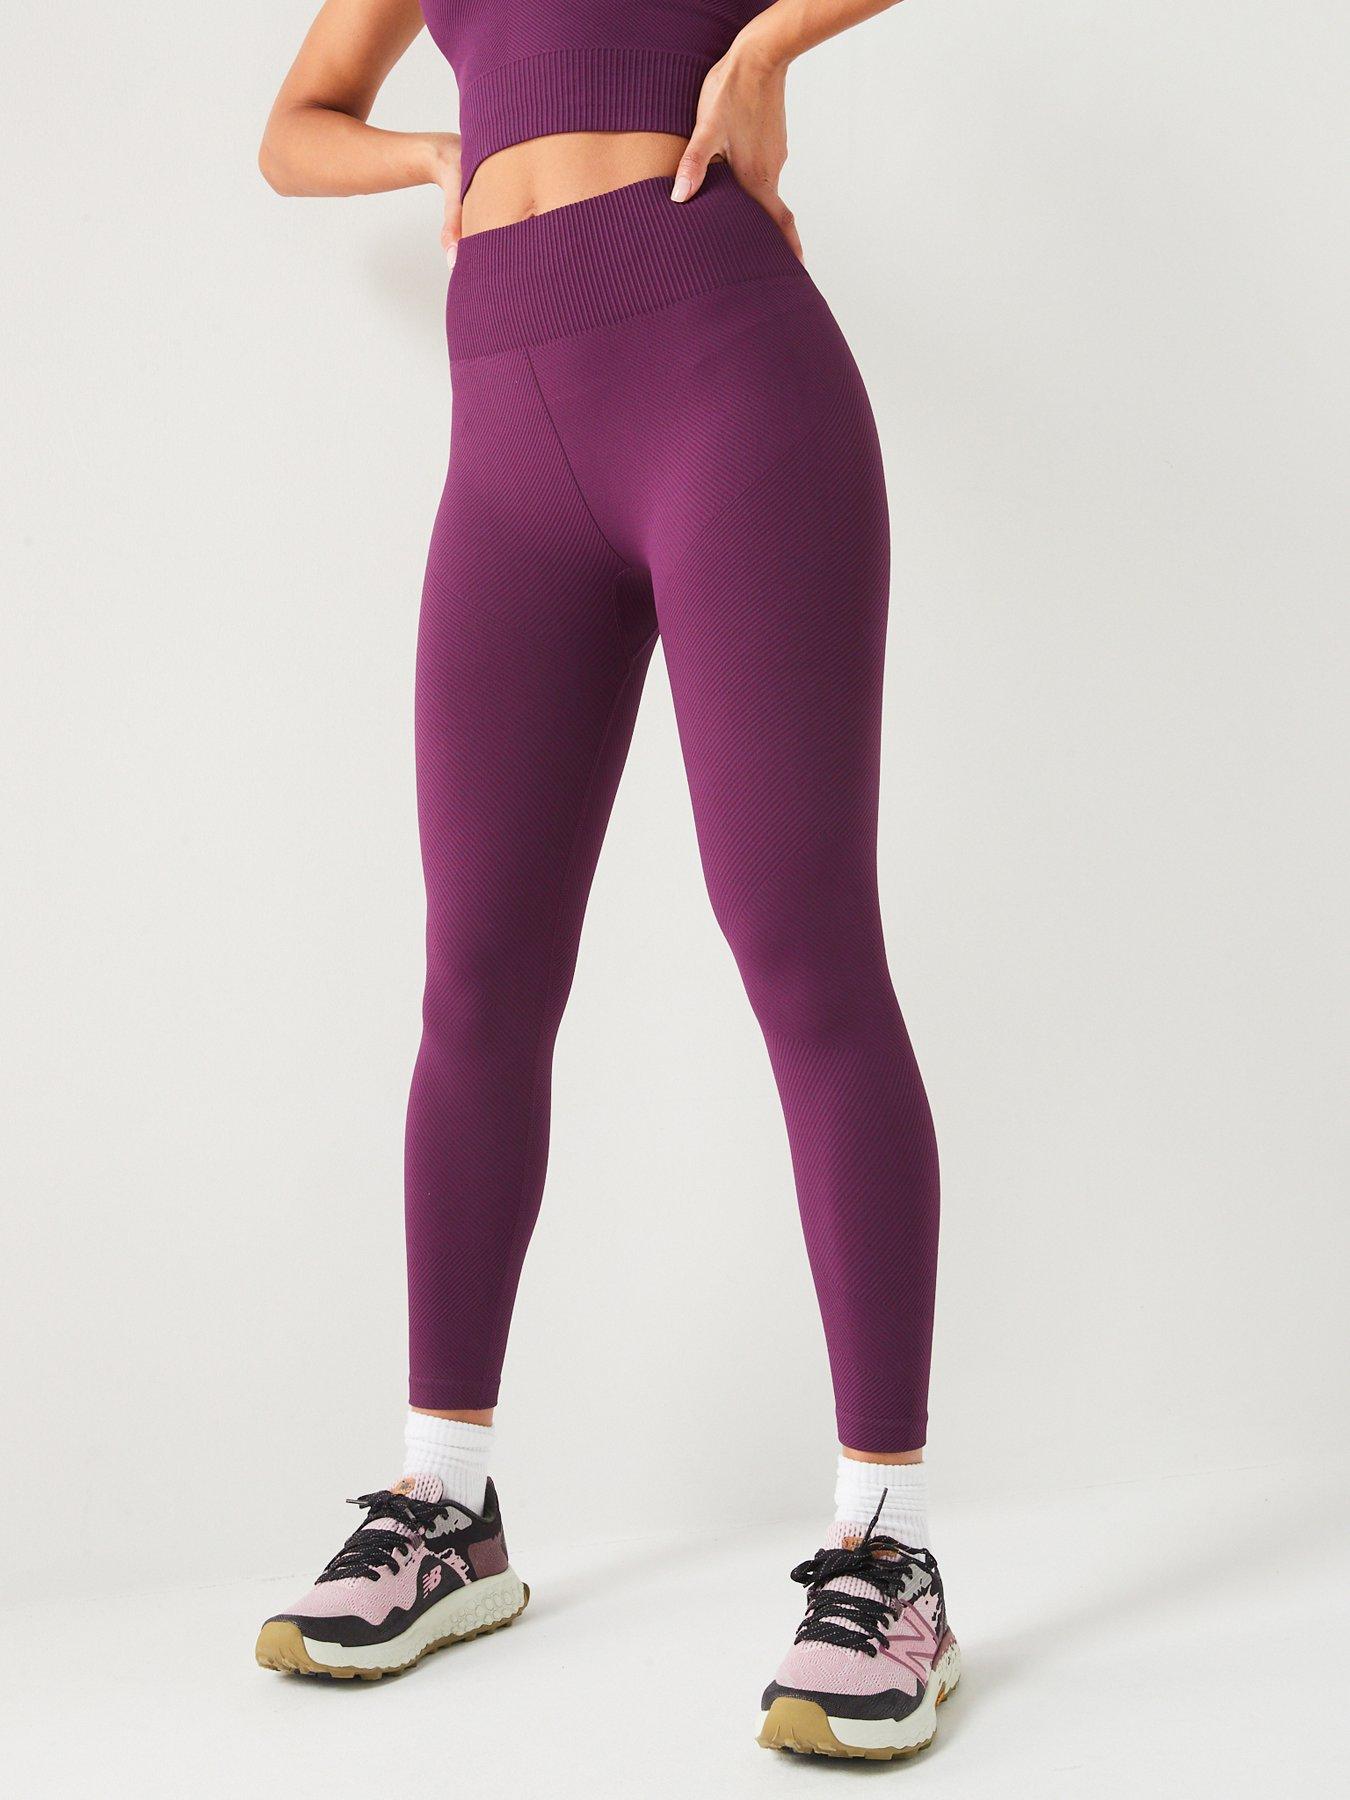 MY PROTEIN Curve women legging, Women's Fashion, Activewear on Carousell